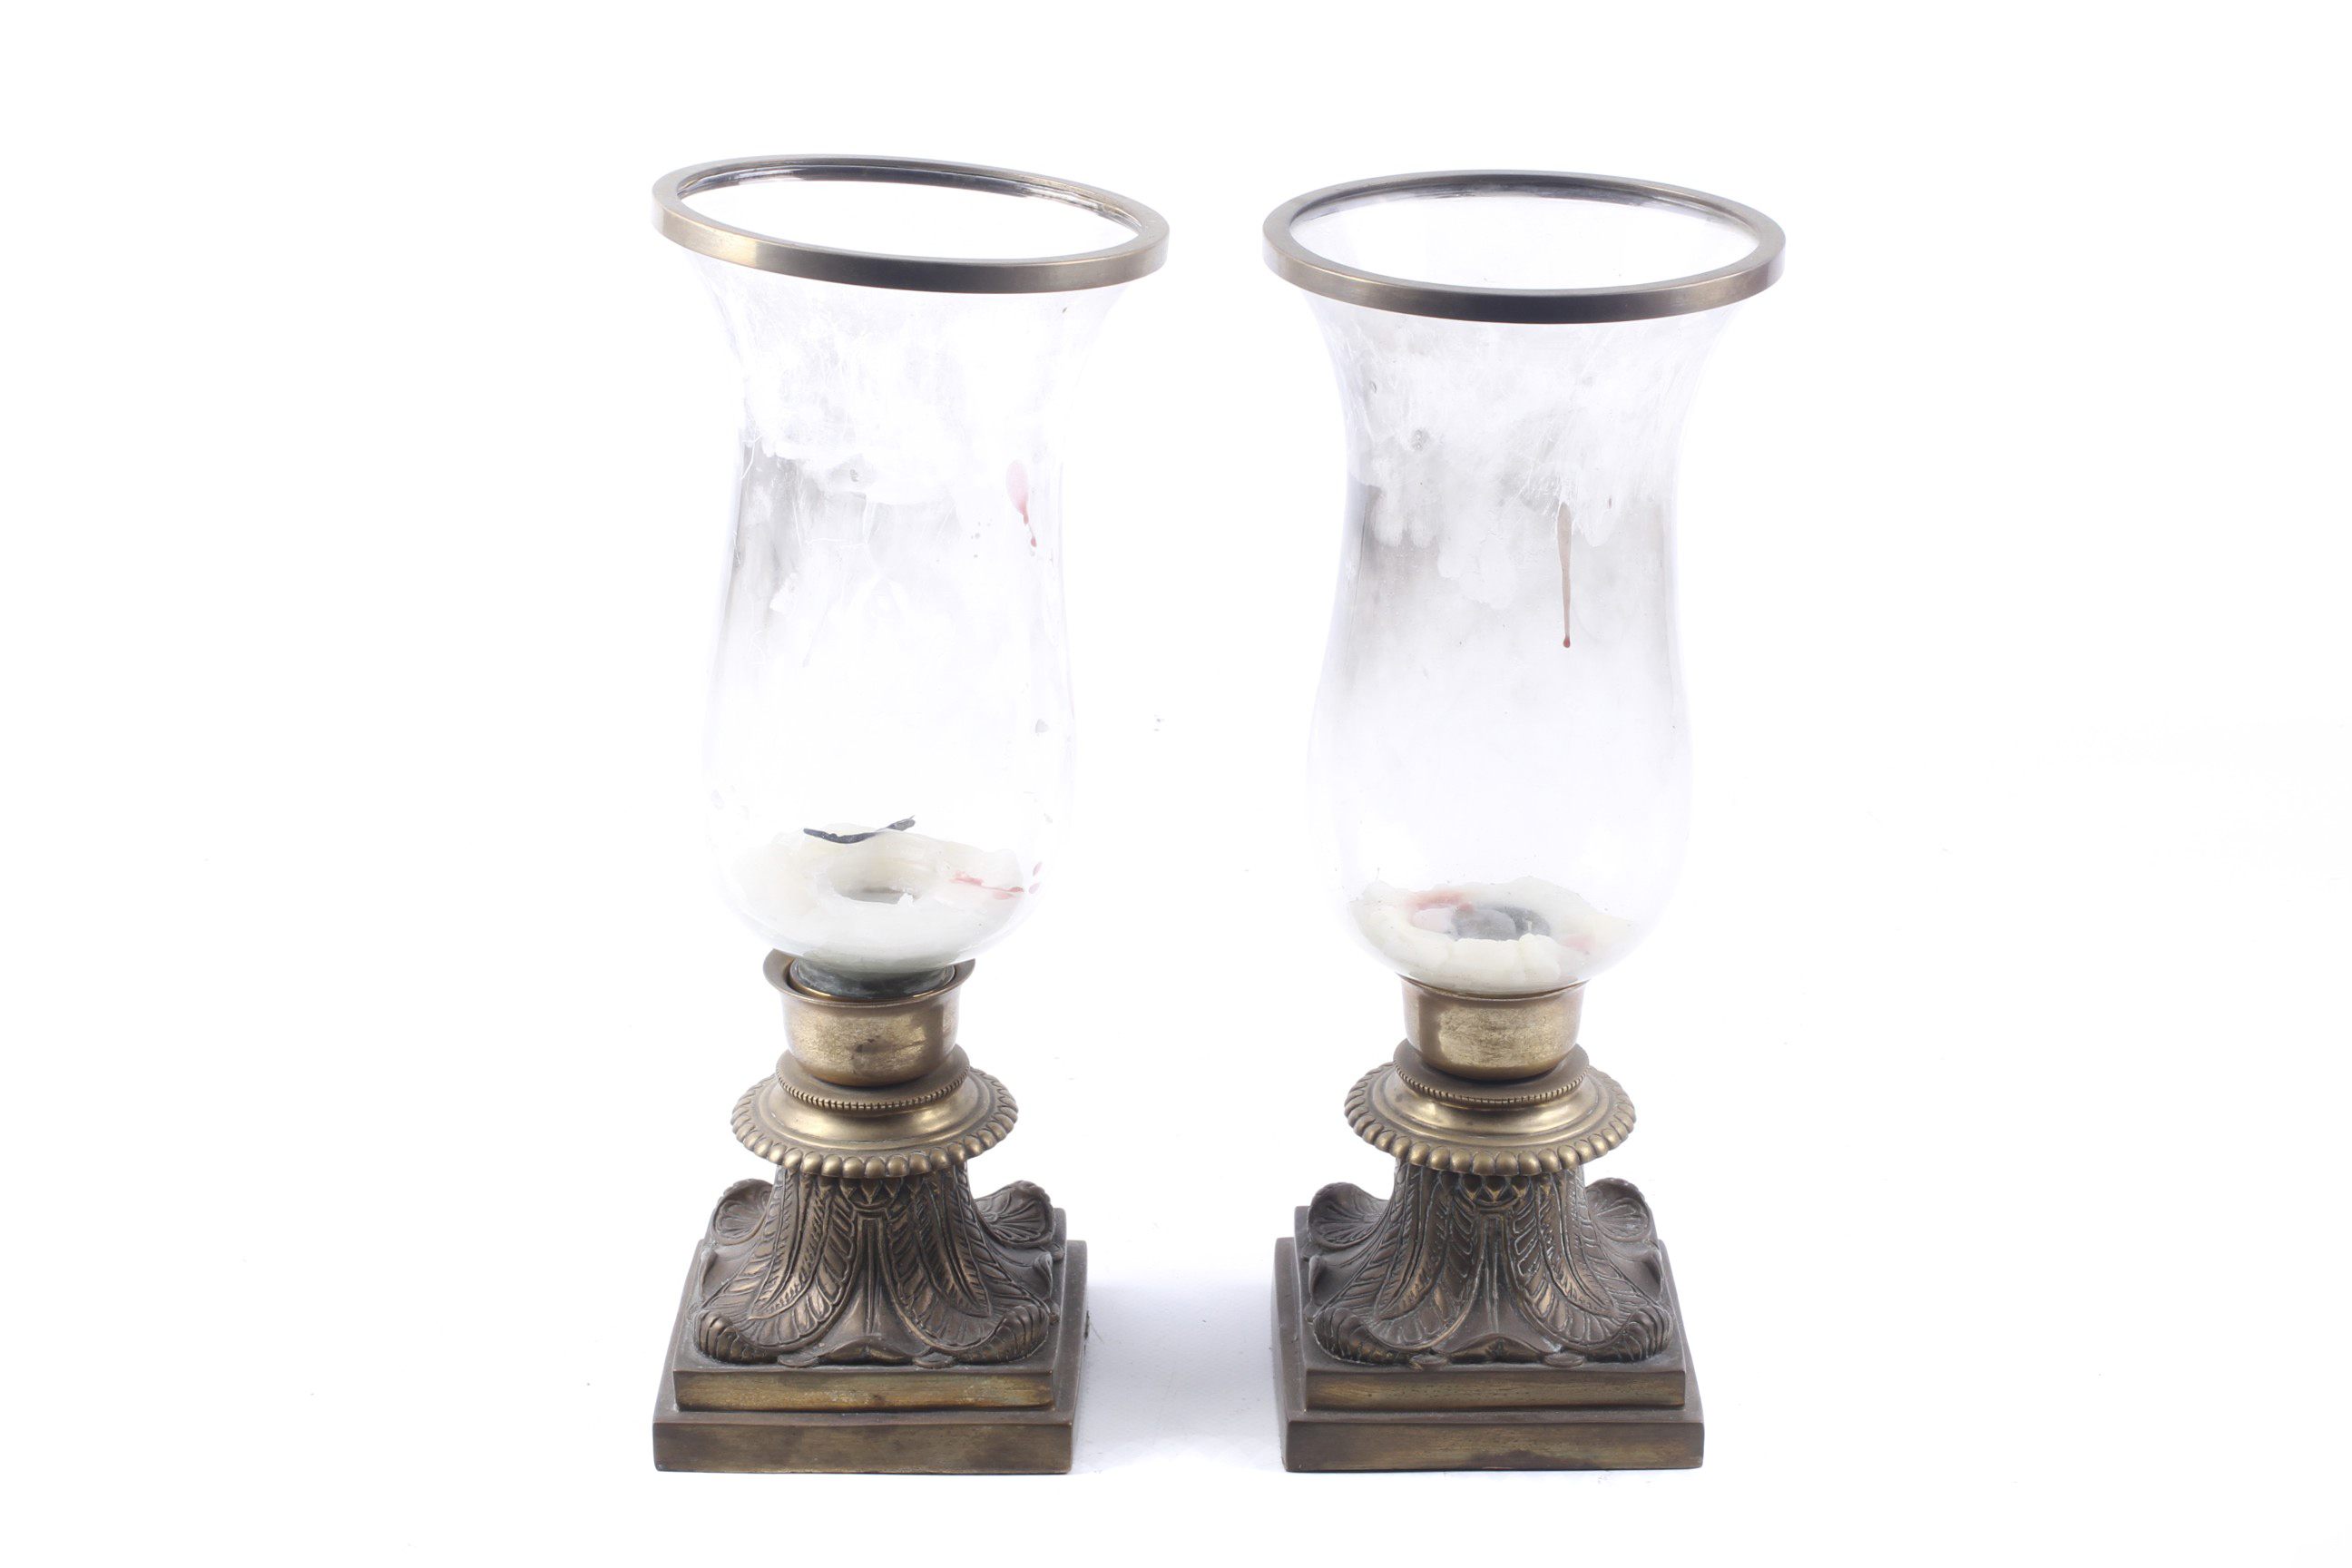 A pair of Victorian candle lamps. With glass shades, mounted on brass stepped square bases.